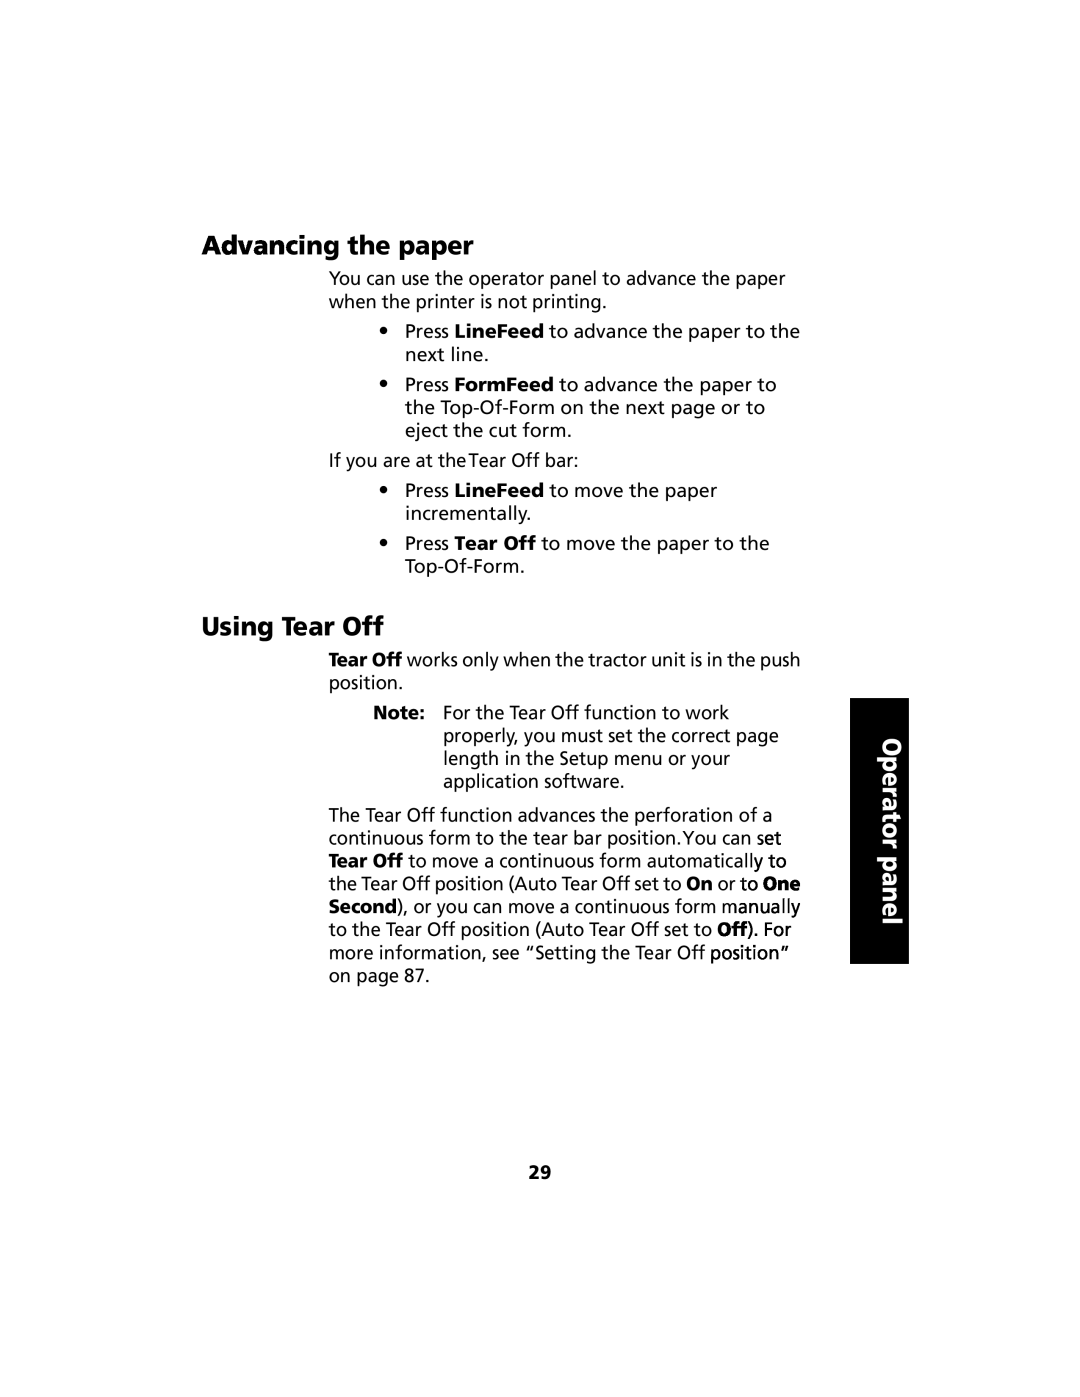 Lexmark 2480 manual Advancing the paper, Using Tear Off, Operator panel 